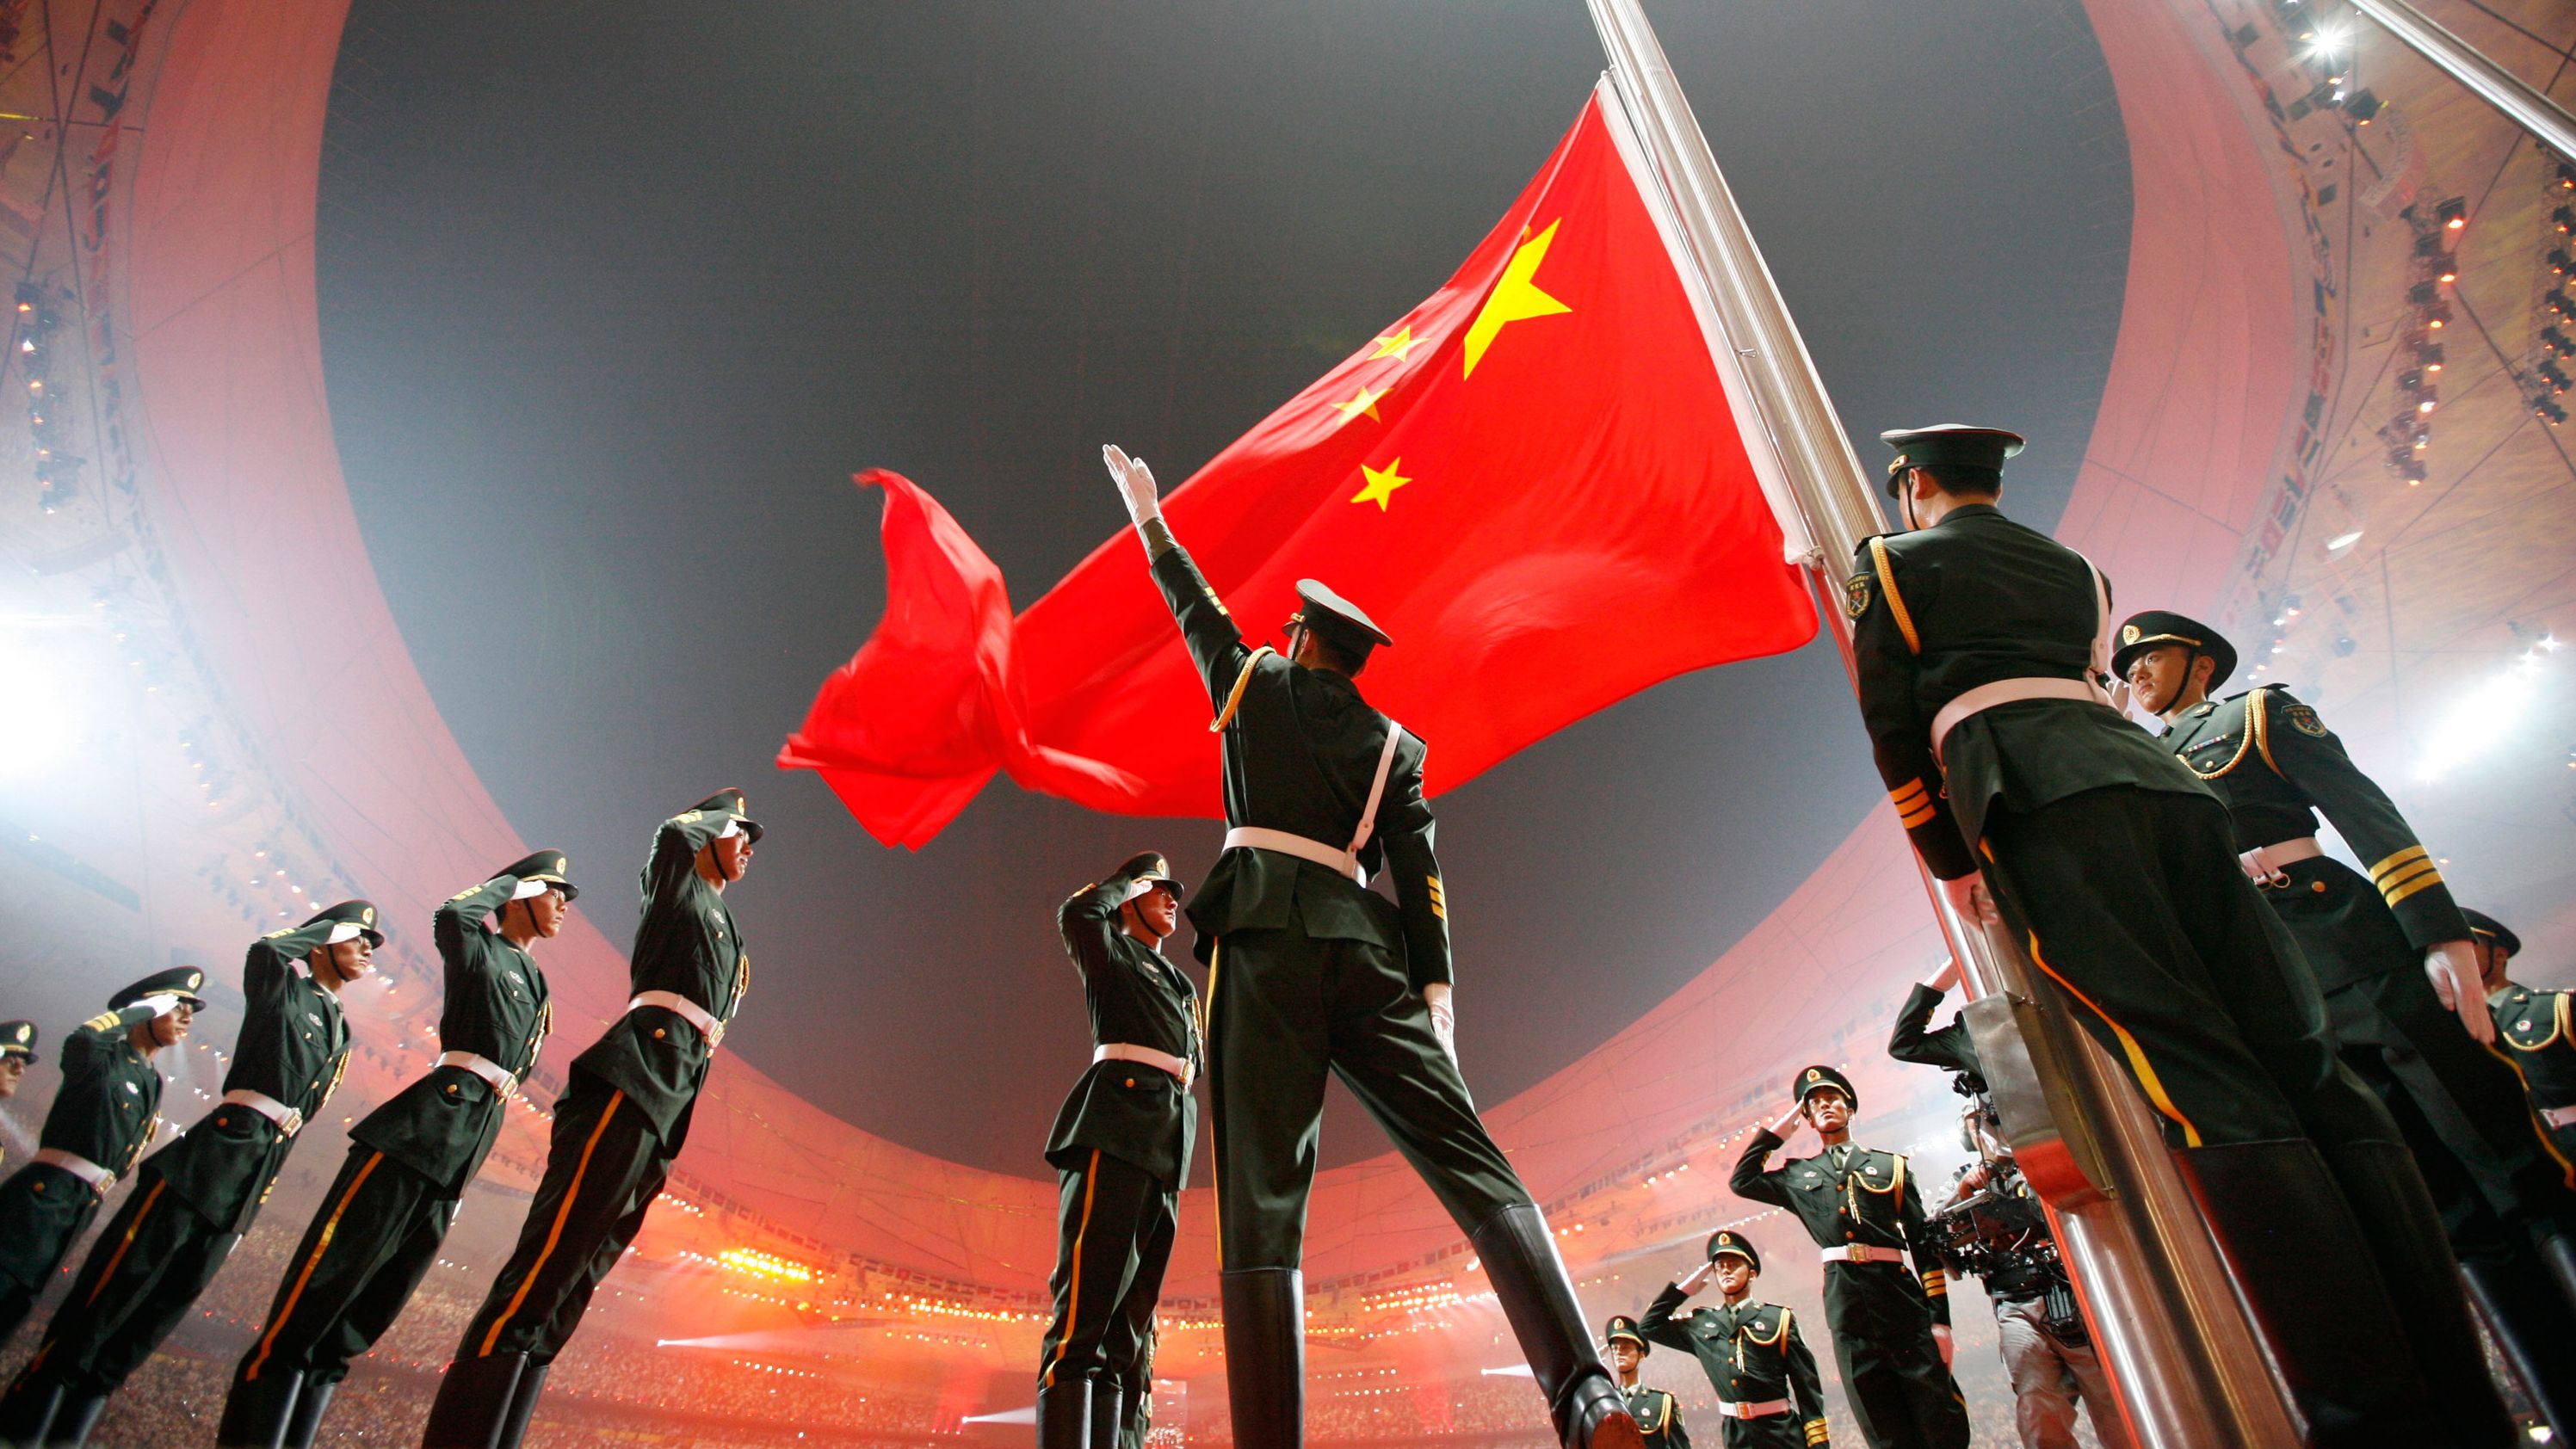 China's flag is raised during the opening ceremony of the 2008 Summer Olympics, which were held in Beijing. China had never hosted the Olympics before, and in the run-up to the 2008 Games — held under the slogan "One World, One Dream" — <a href="https://www.cnn.com/2021/02/21/asia/beijing-olympics-2008-2022-soft-power-dst-intl-hnk/index.html" target="_blank">there were calls for a boycott</a> over the country's human-rights record.